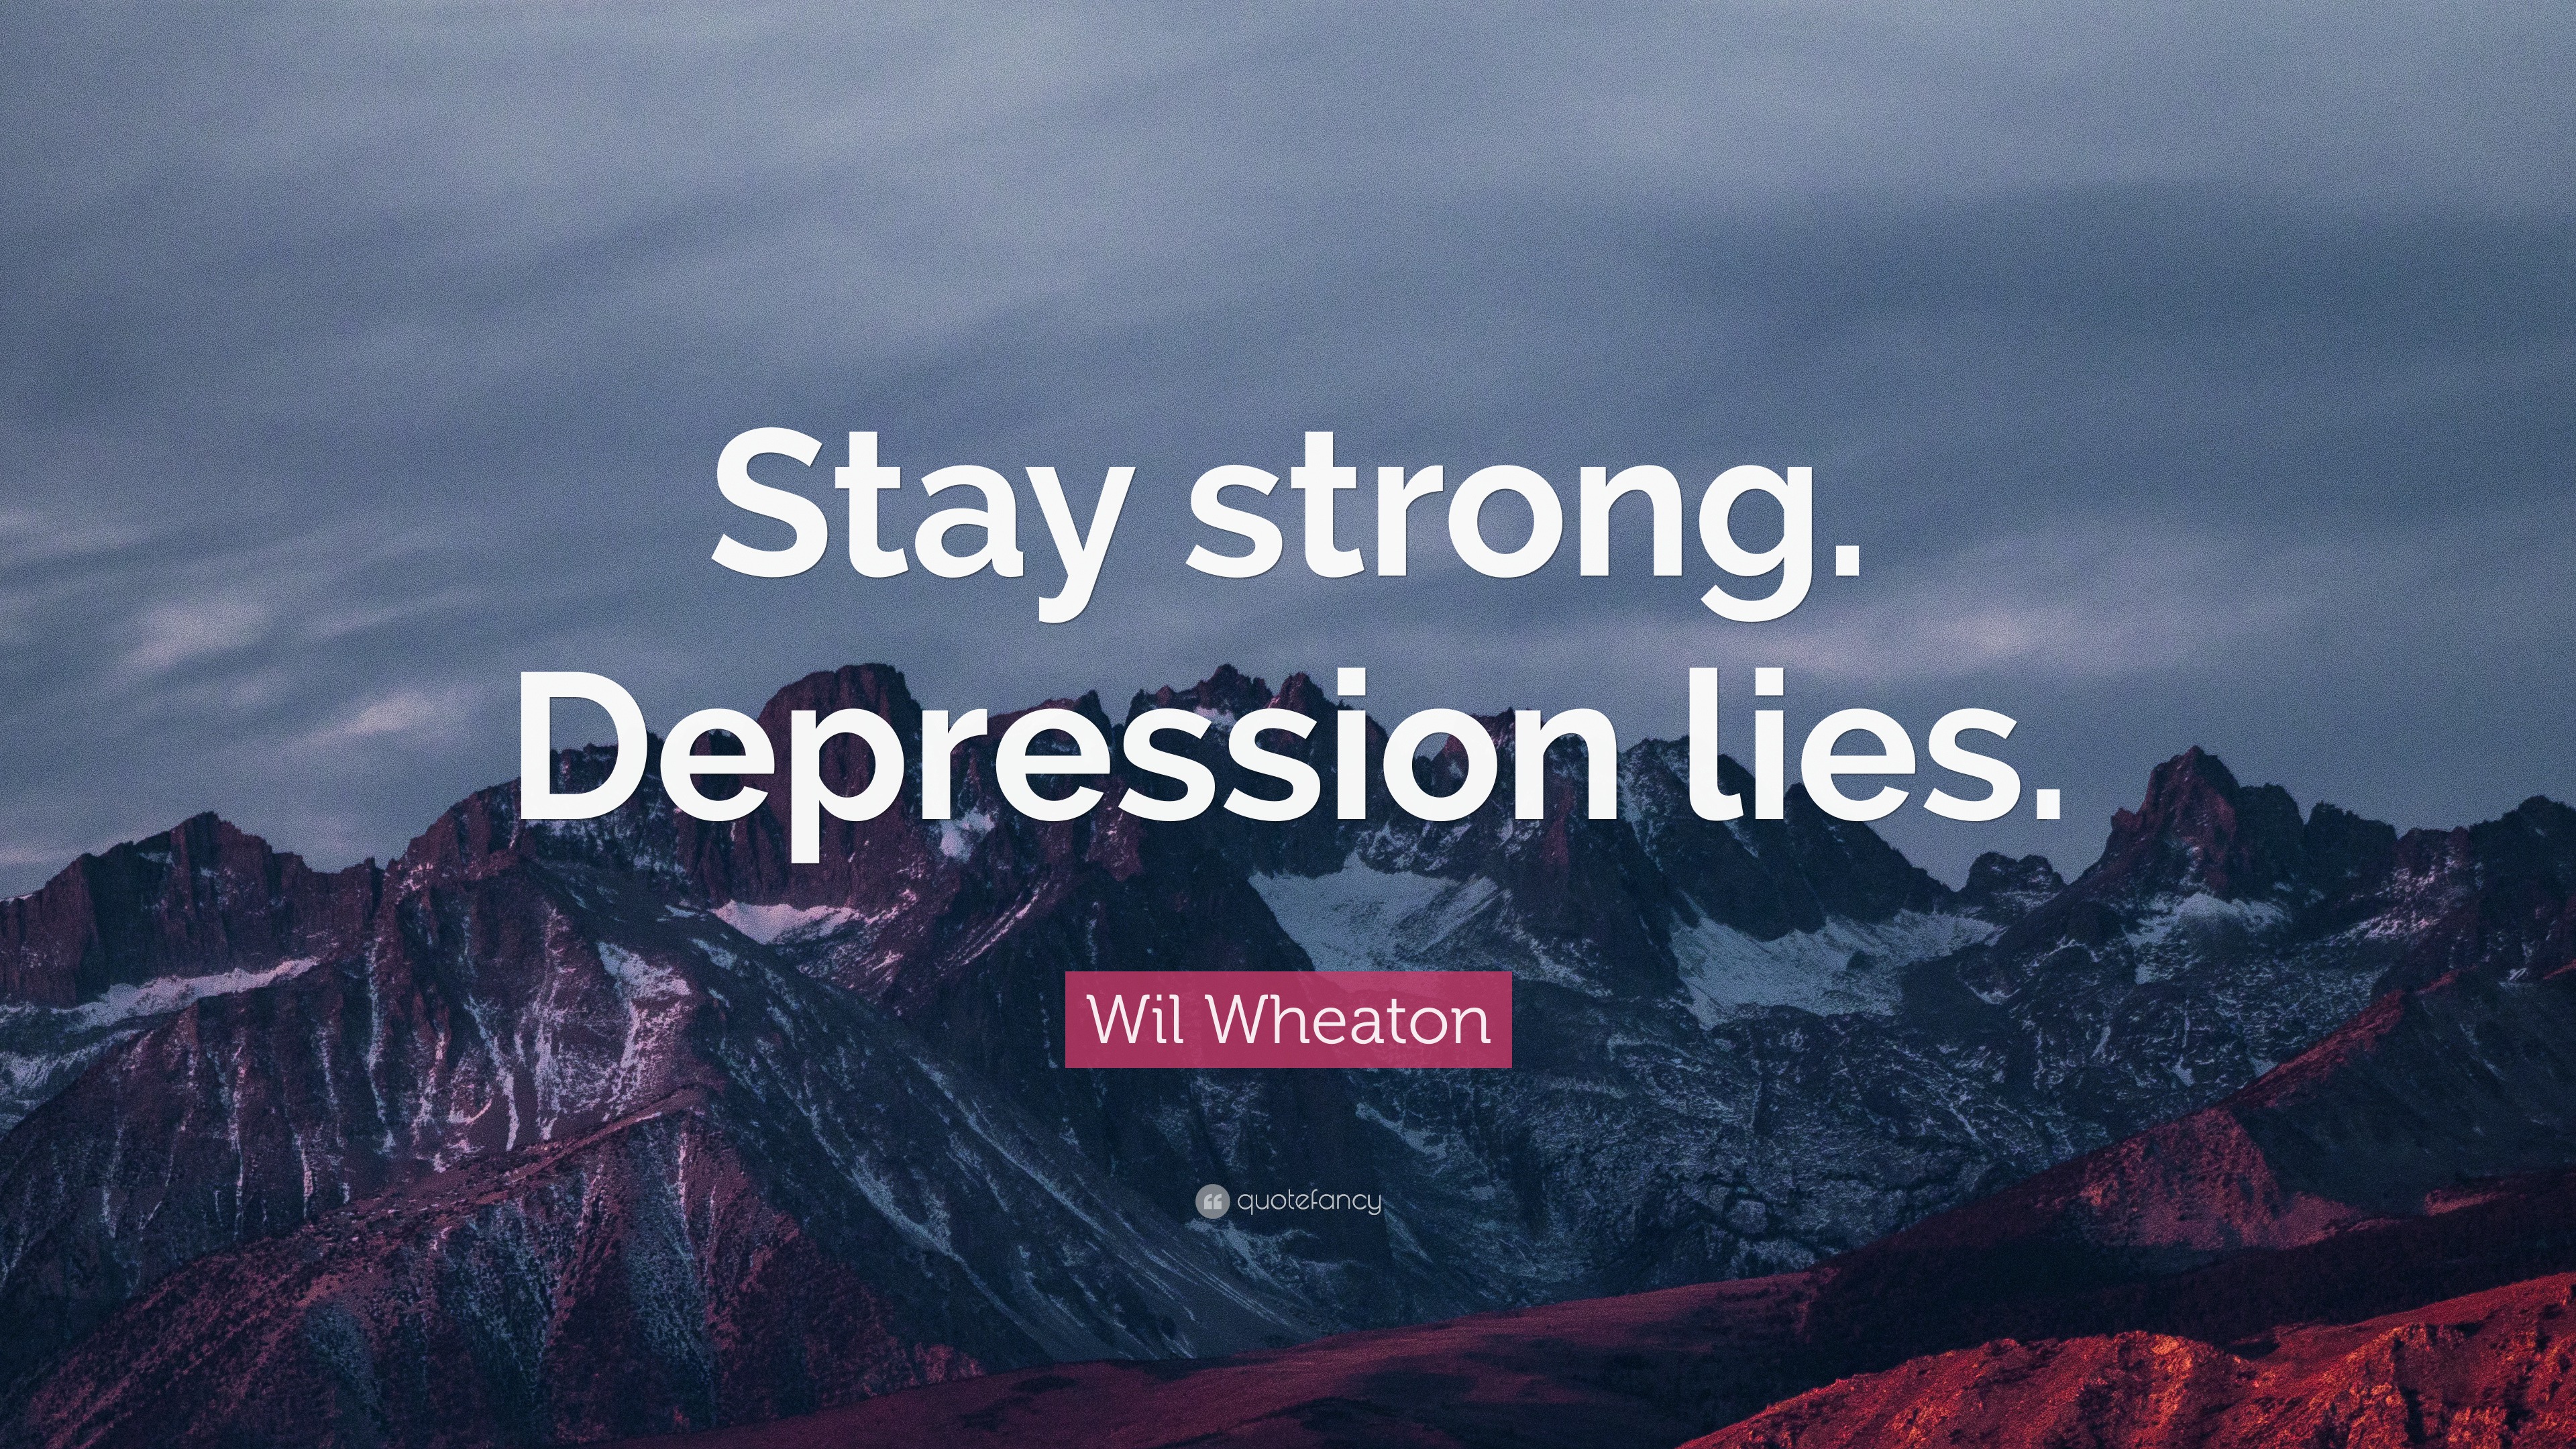 Stay strong. Depression lies